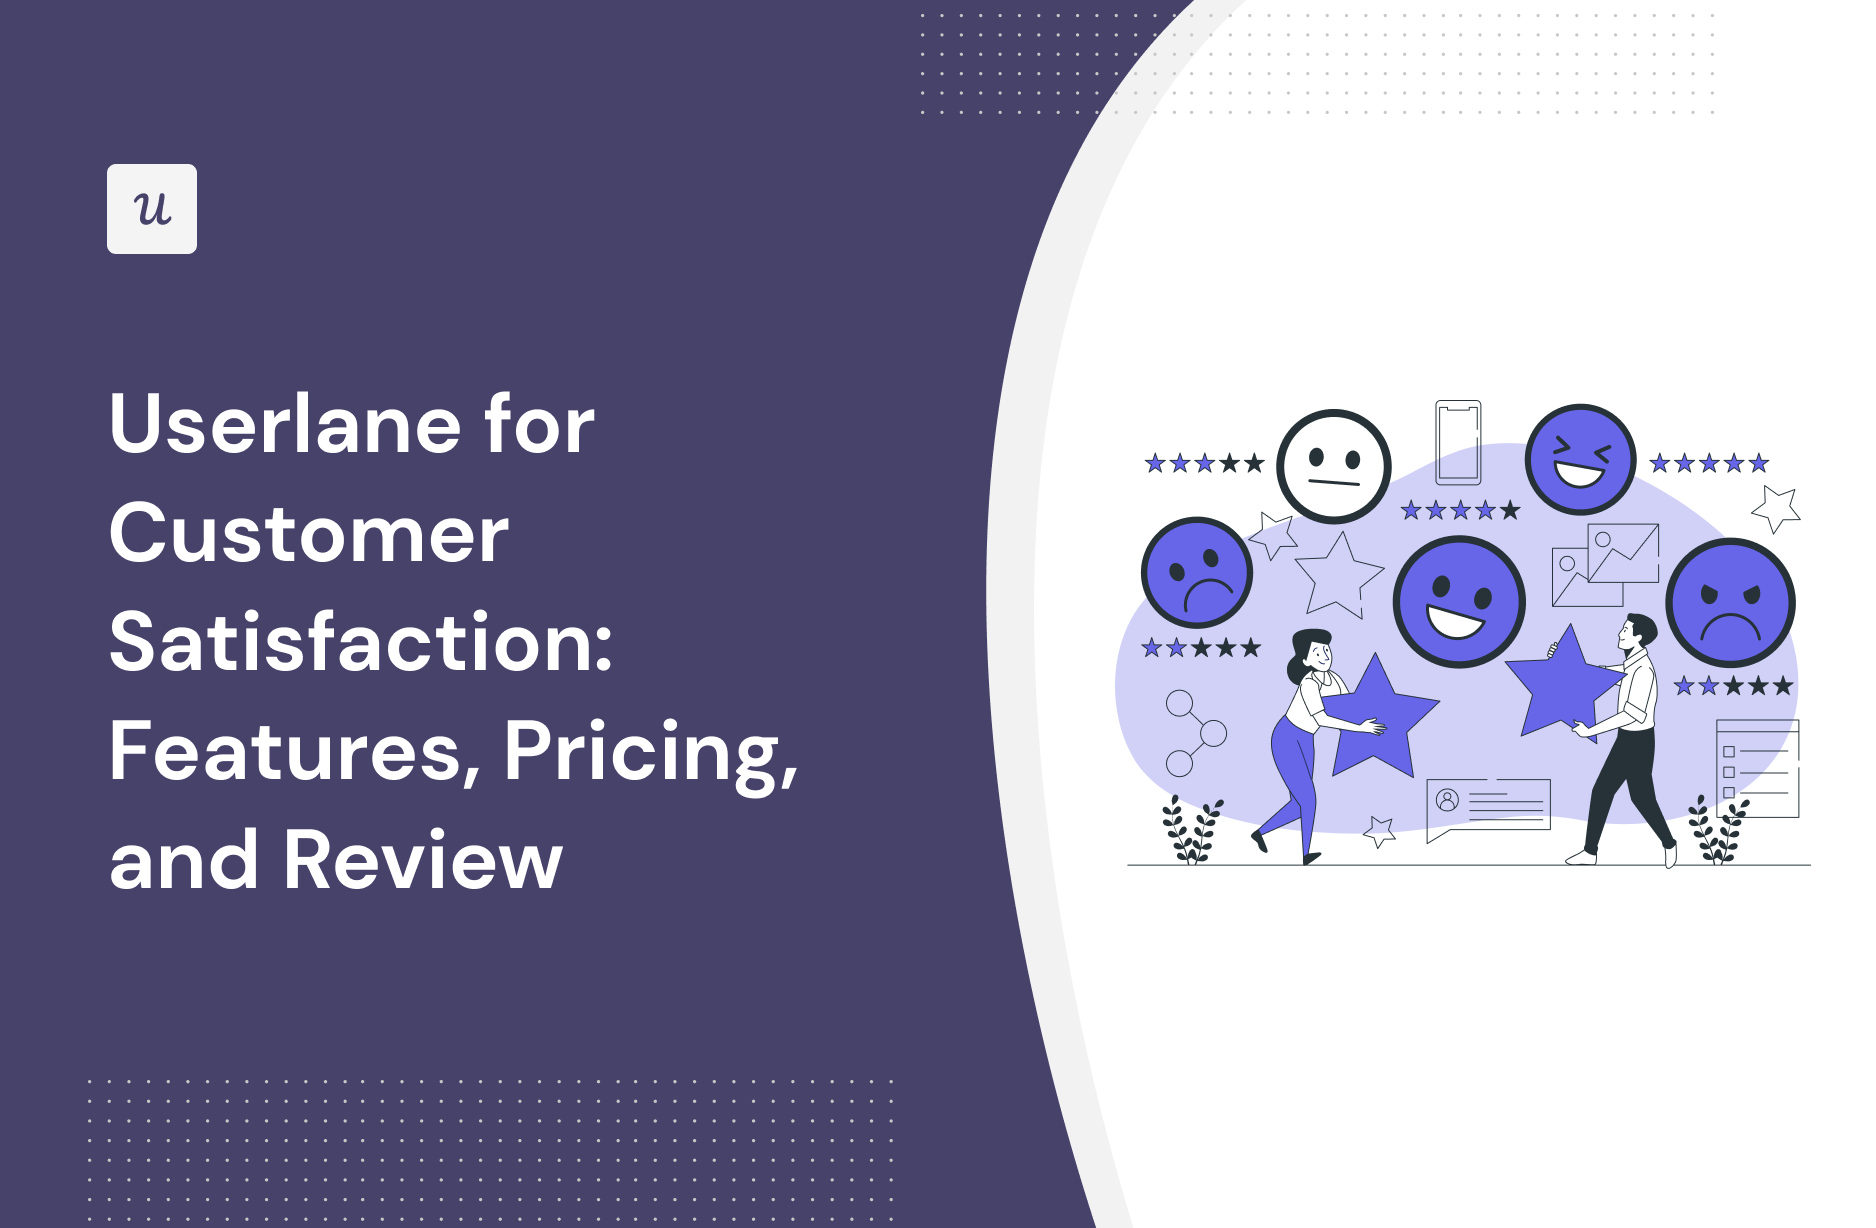 Userlane for Customer Satisfaction: Features, Pricing, and Review